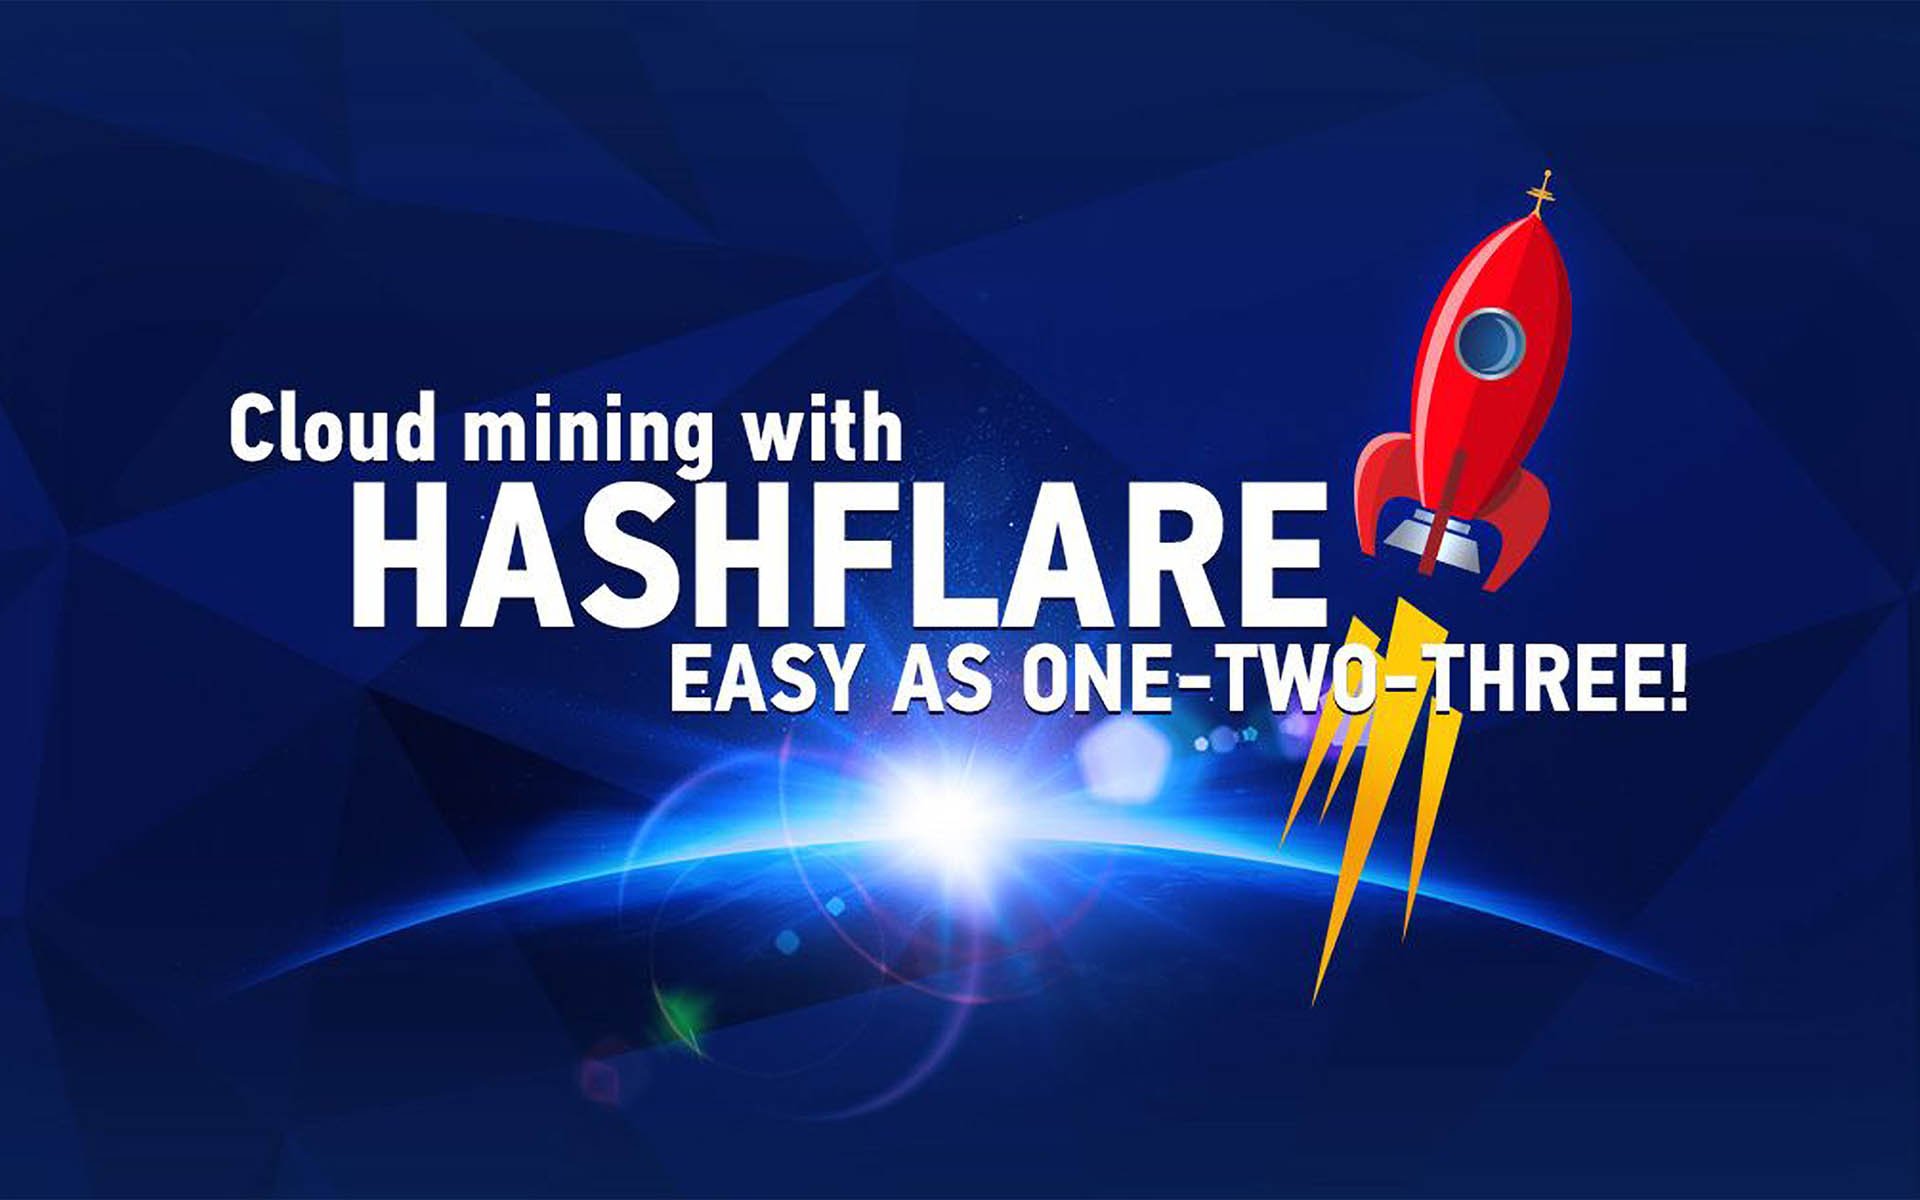 Leading Cloud Mining Company HashFlare Offering New Discount Until September 17, 2017